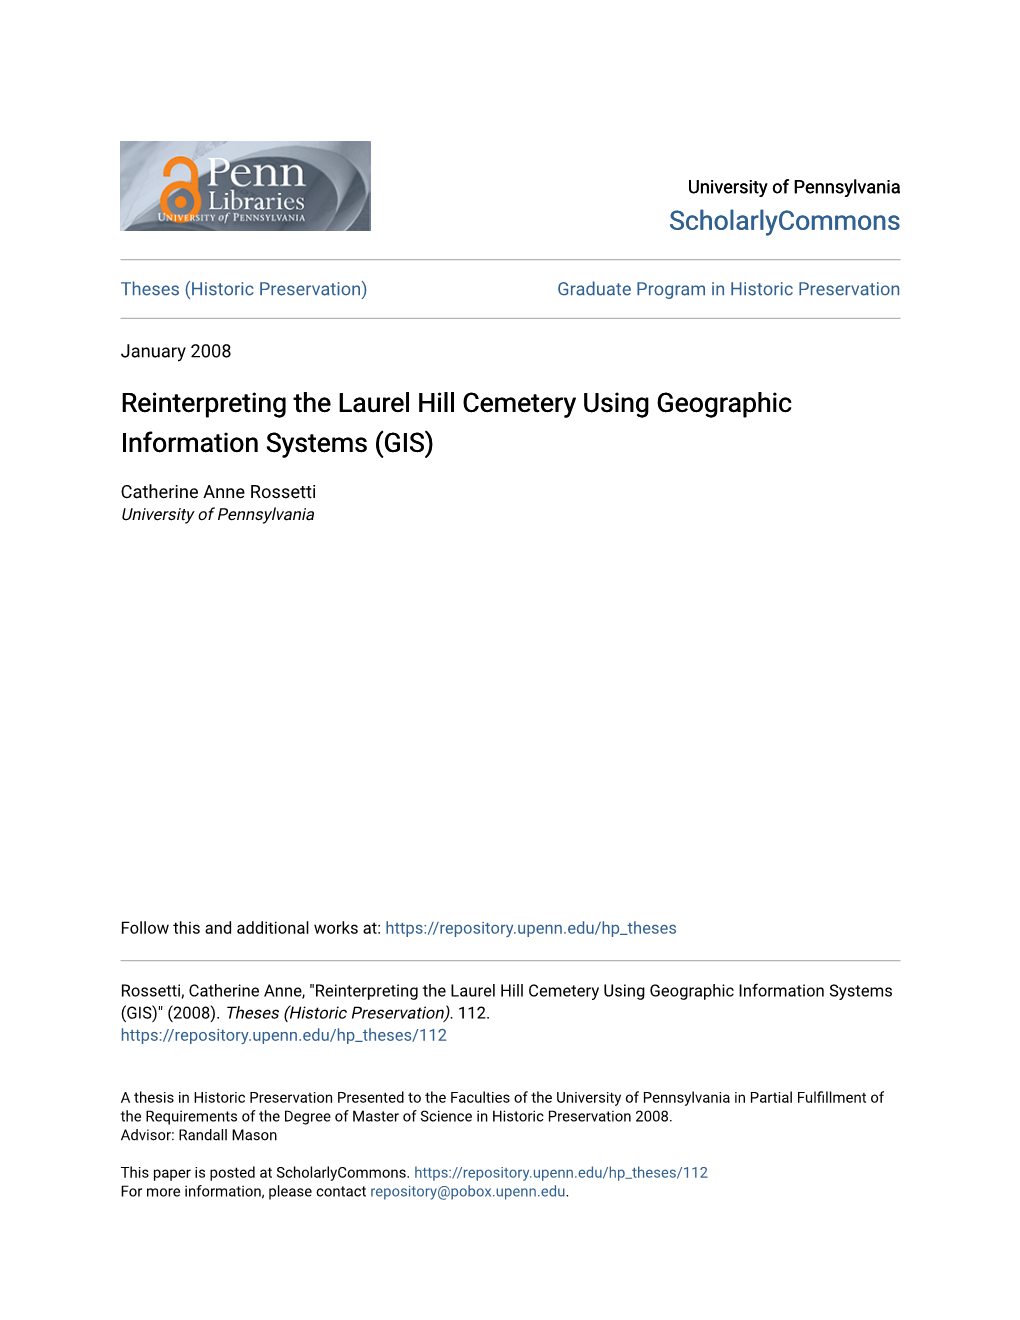 Reinterpreting the Laurel Hill Cemetery Using Geographic Information Systems (GIS)